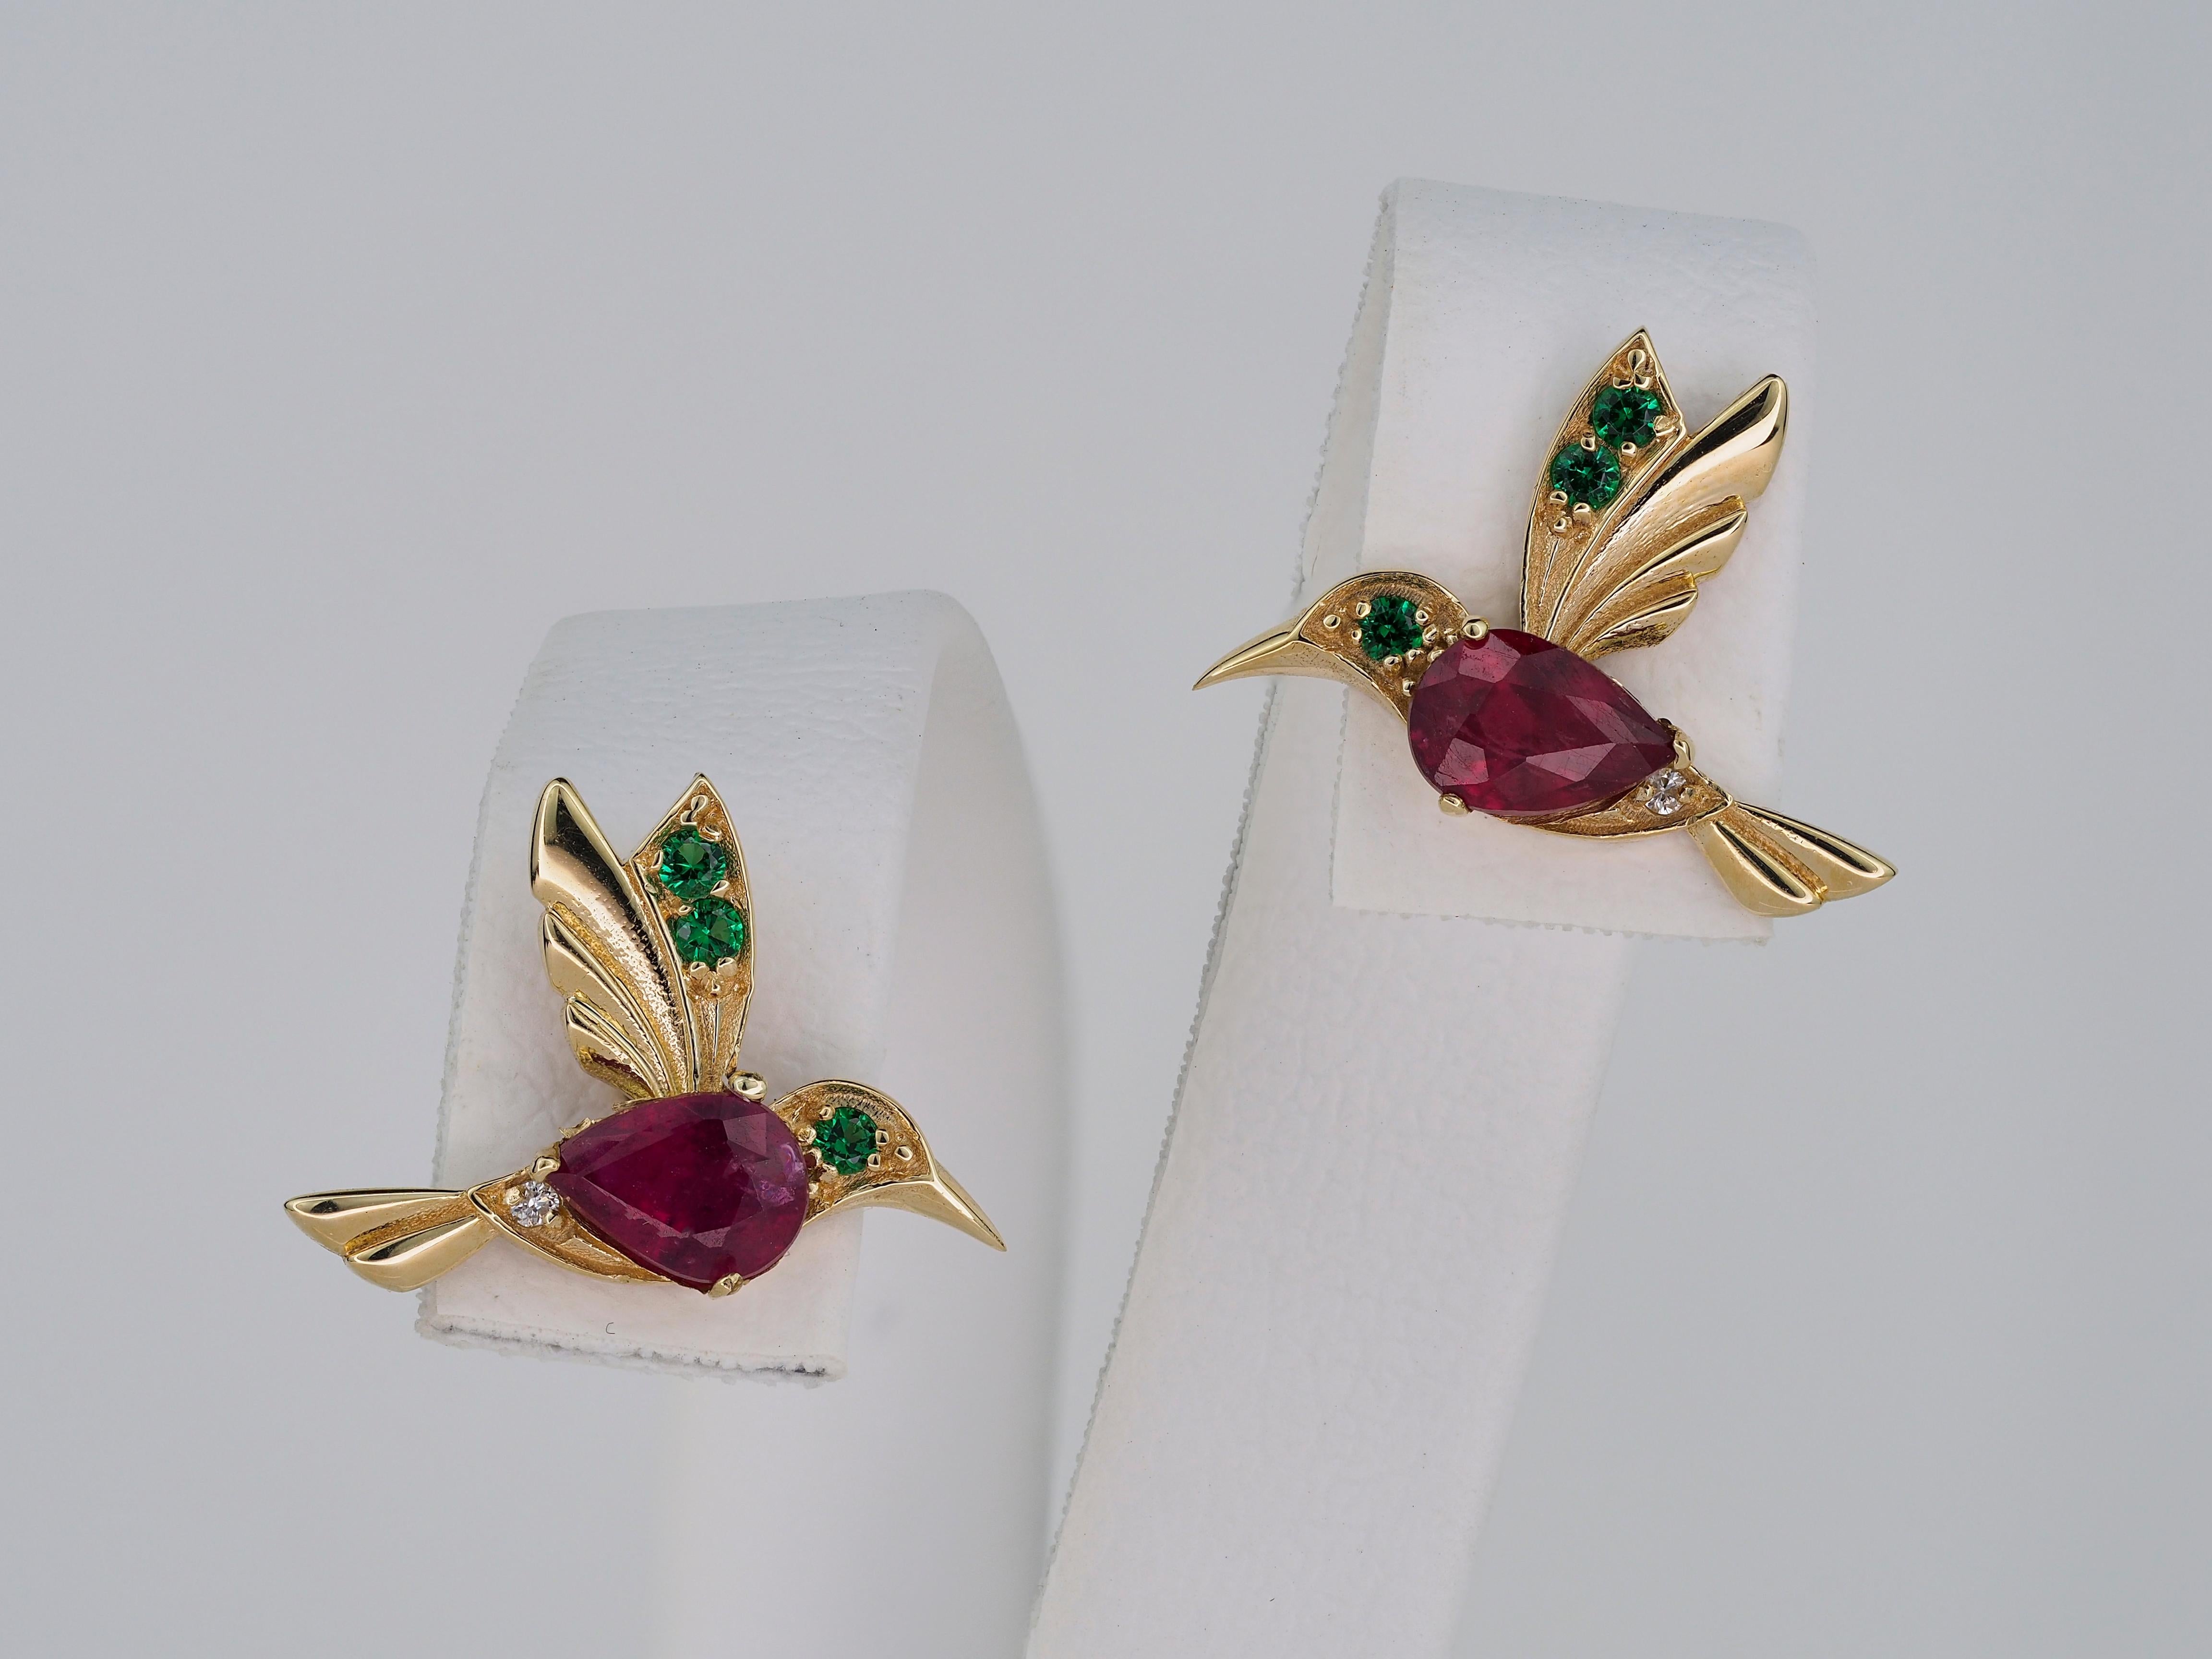 14k Gold Hummingbird Earings Studs with Rubies, Bird Stud Earrings with Gems ! For Sale 1